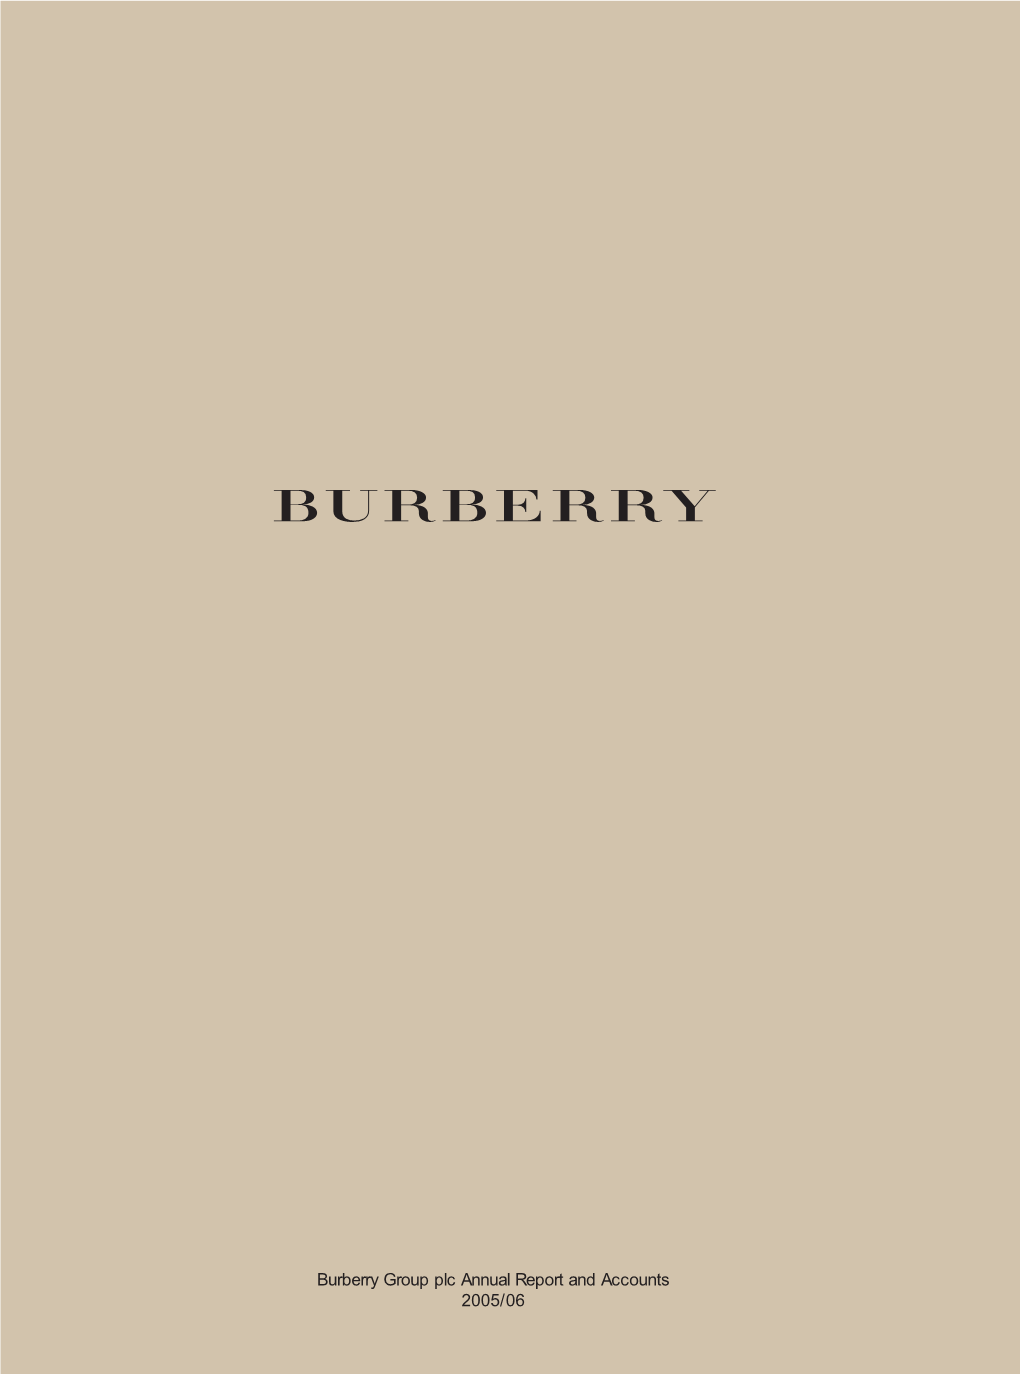 Burberry Group Plc Annual Report and Accounts 2005/06 SHAREHOLDER INFORMATION